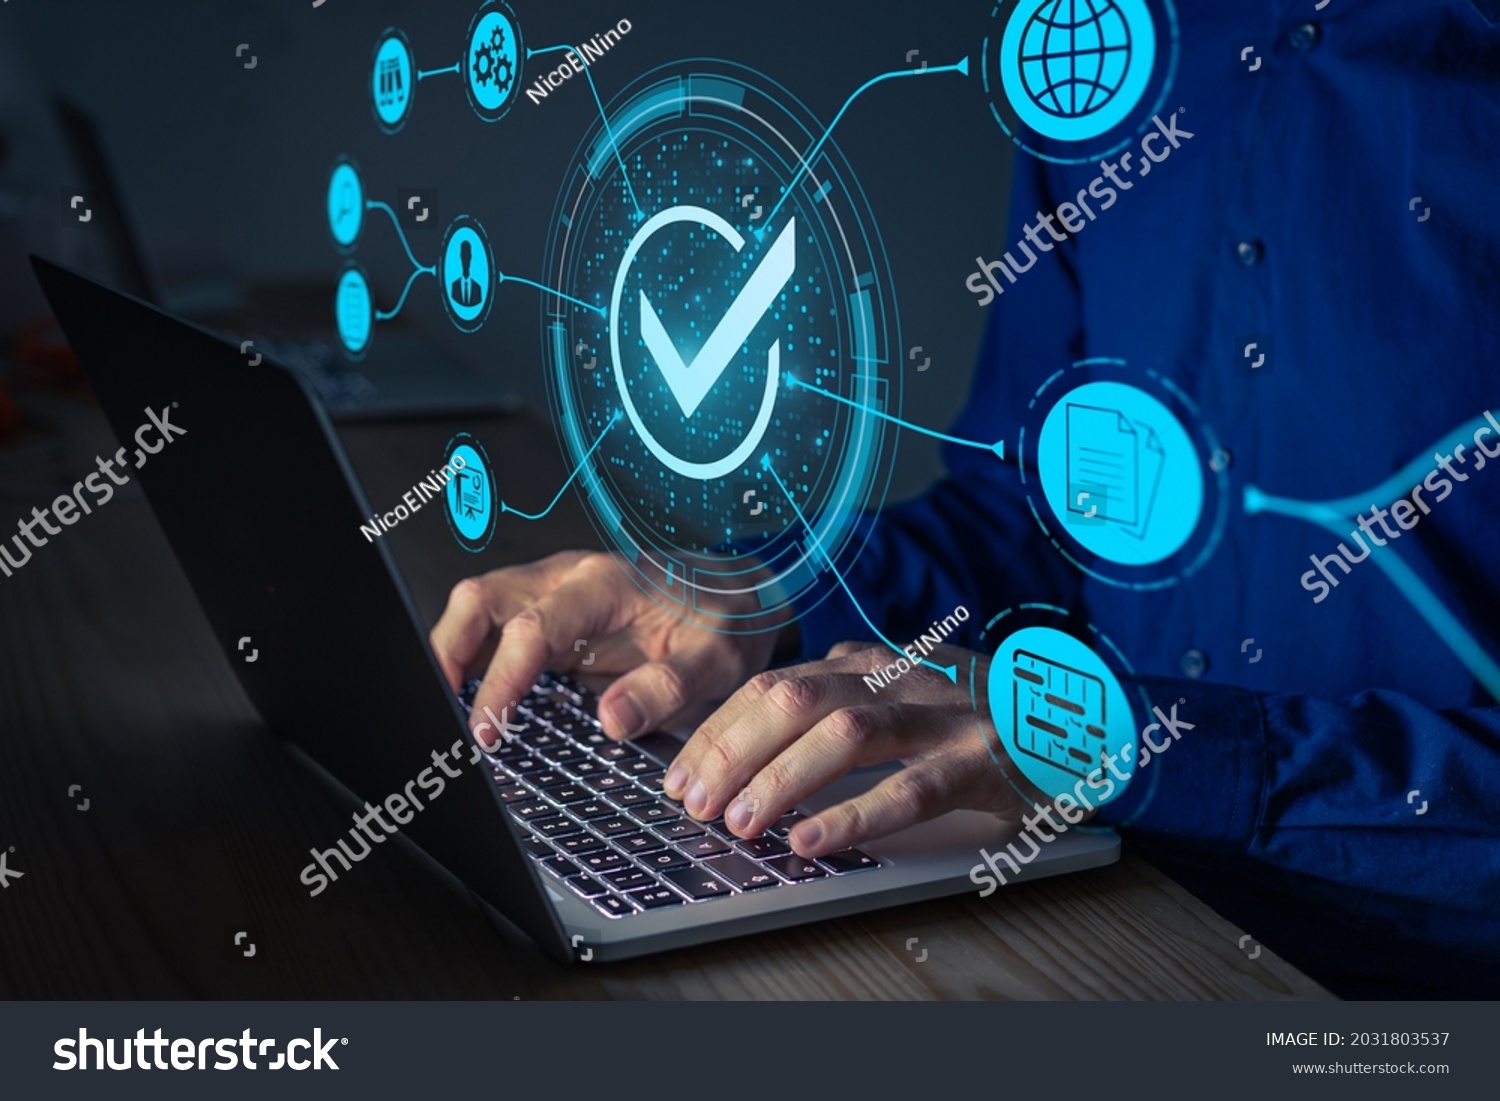 Quality Assurance and certification. Certified internet businesses and services. Compliance to international standards and regulations. Concept with consultant in QA management working on computer. #2031803537